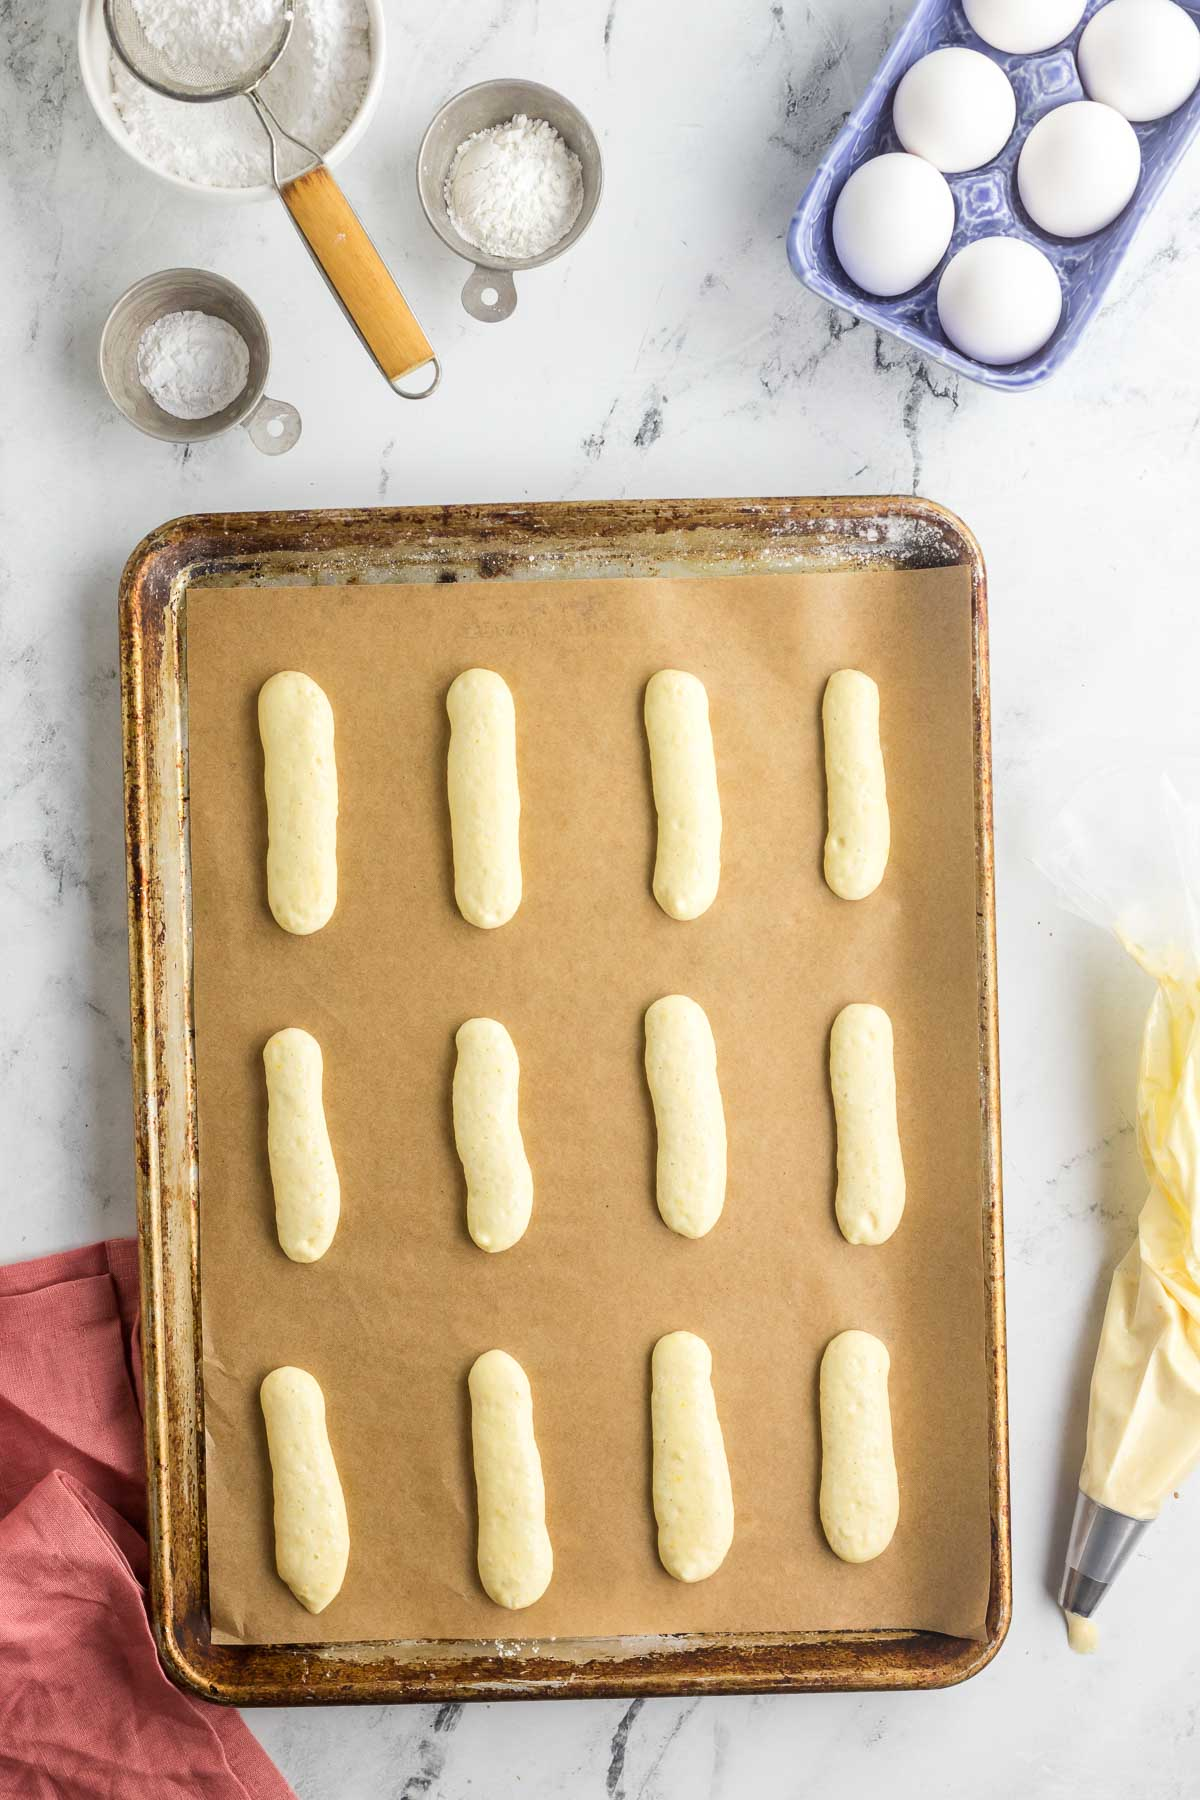 piped lady finger cookies on a baking sheet